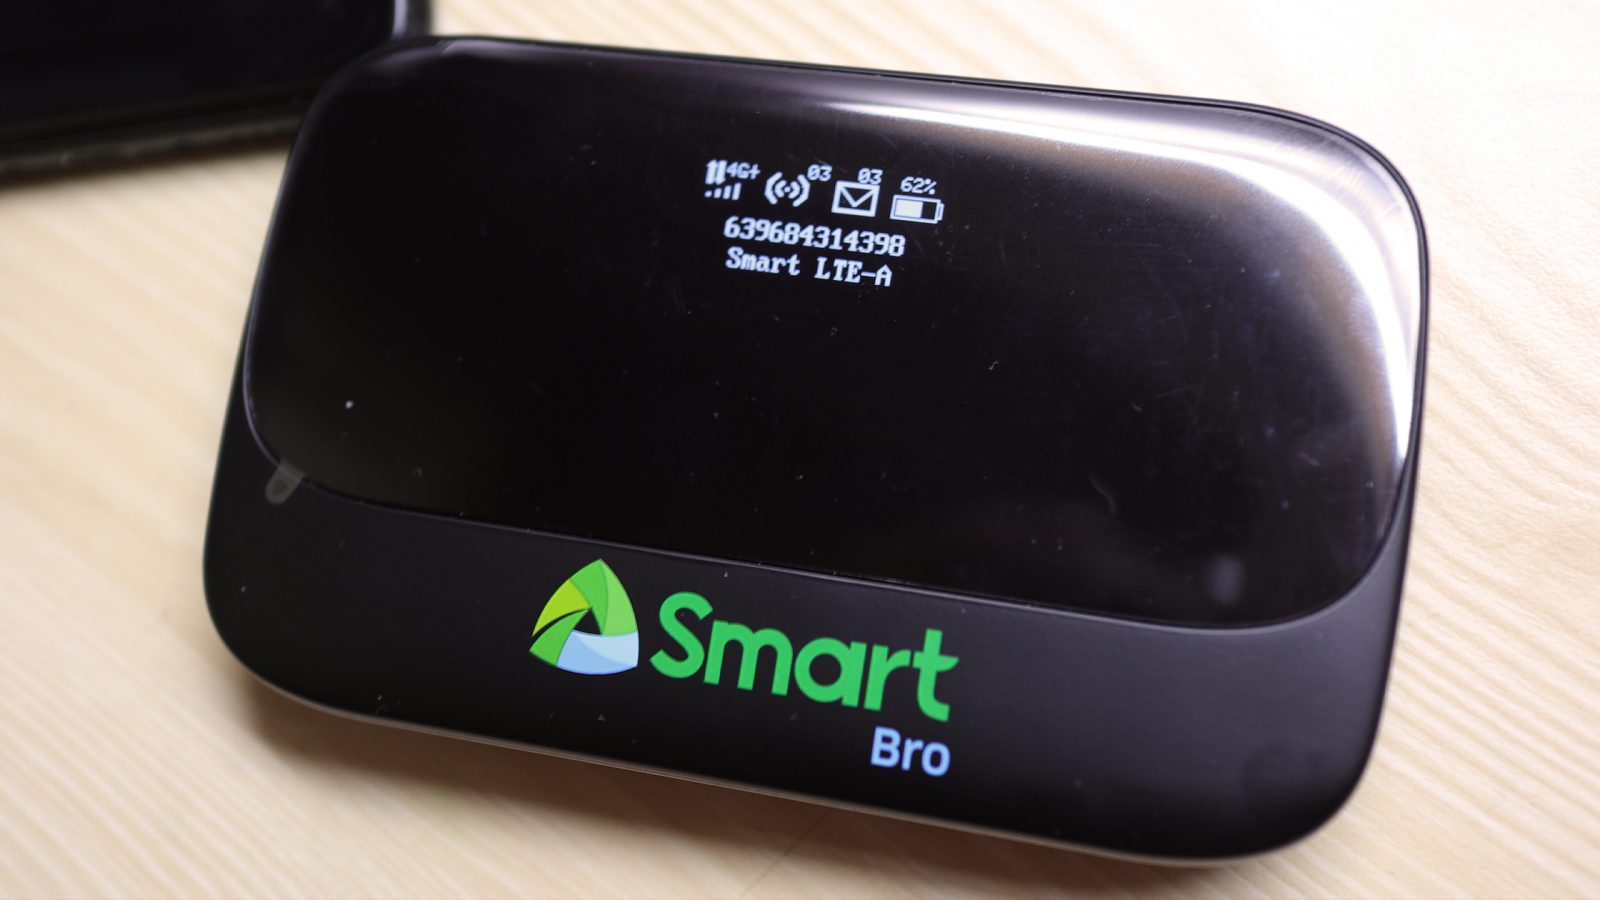 Smart Communications, Inc. - Get a Smart Bro 4G Pocket WiFi now priced at  only P888. This is the hottest deal from Smart Bro and you can share it up  to 10